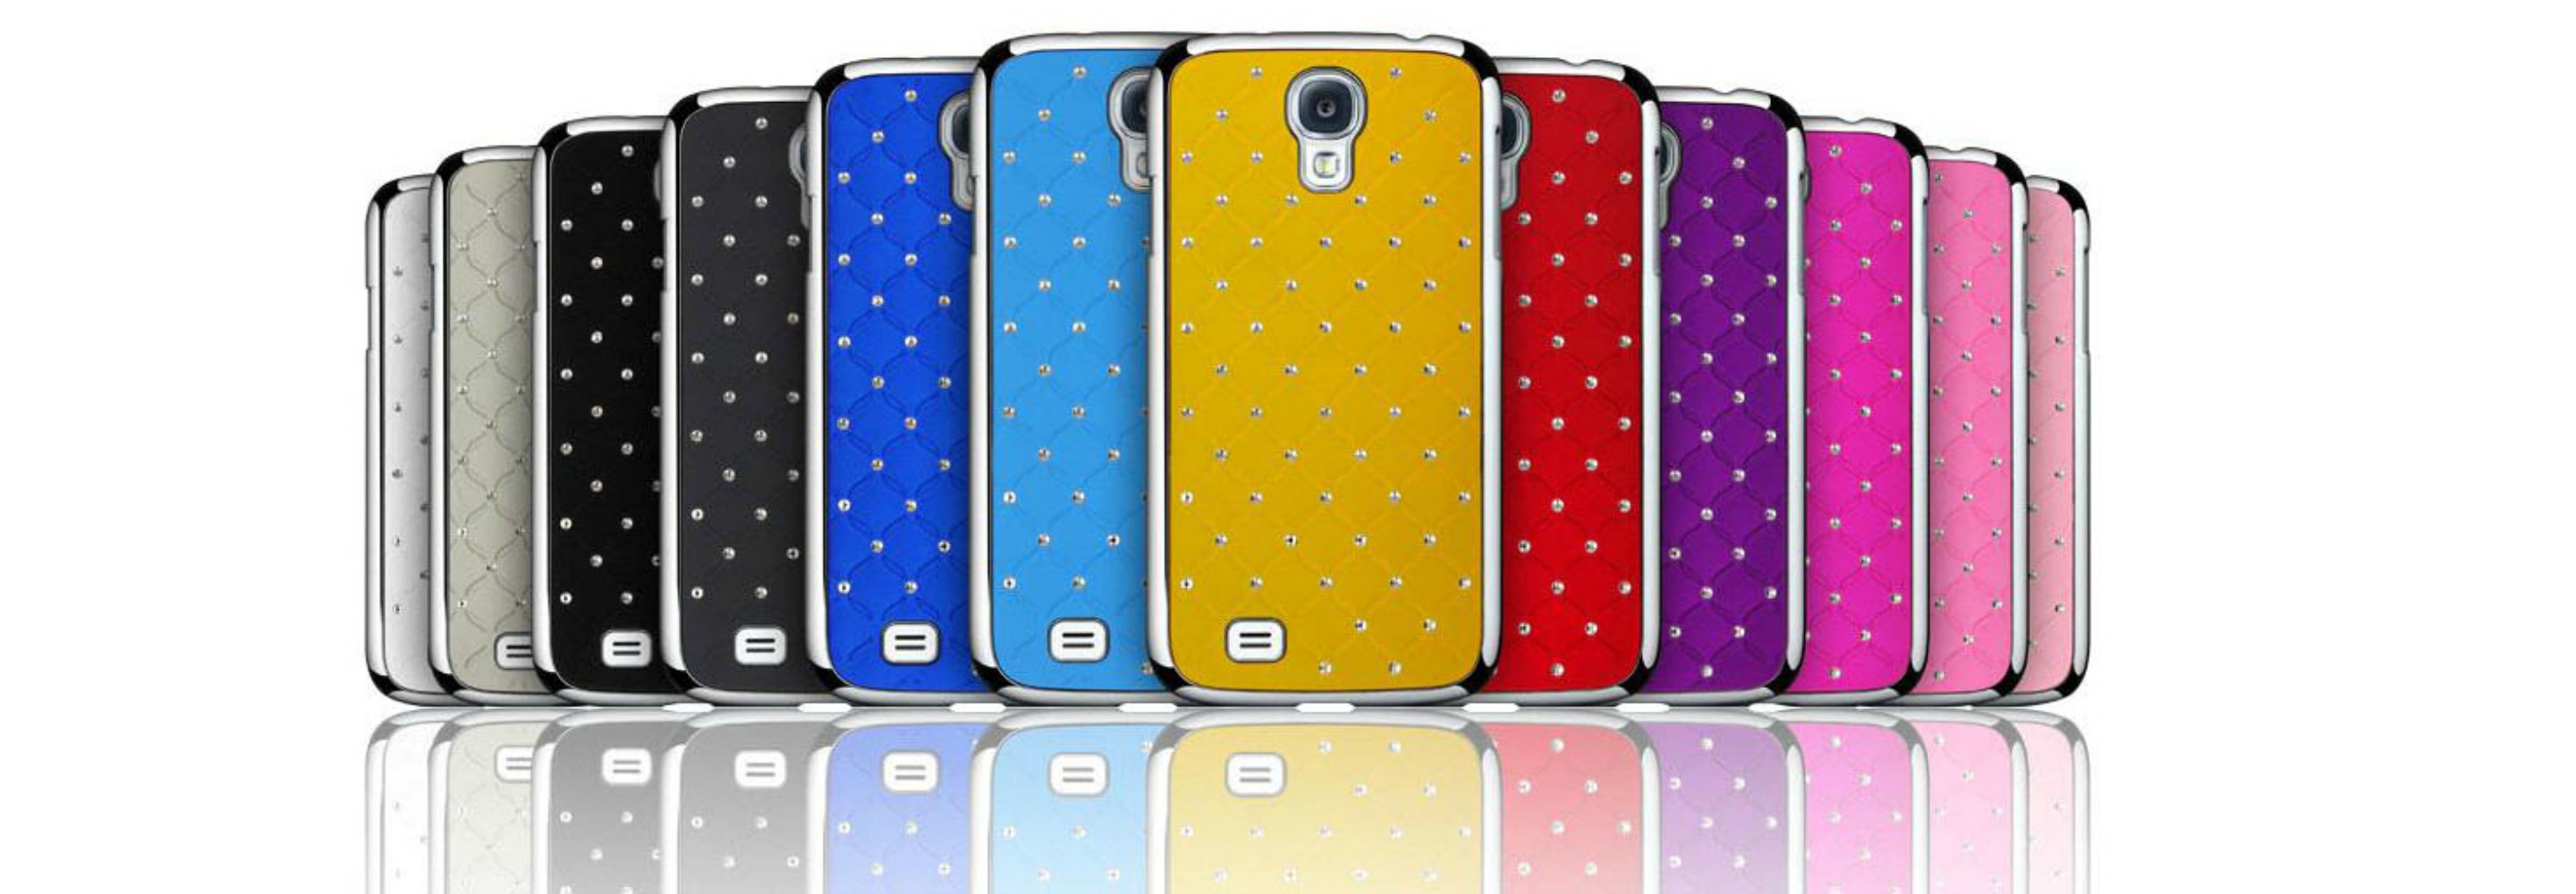 where can i buy phone cases online